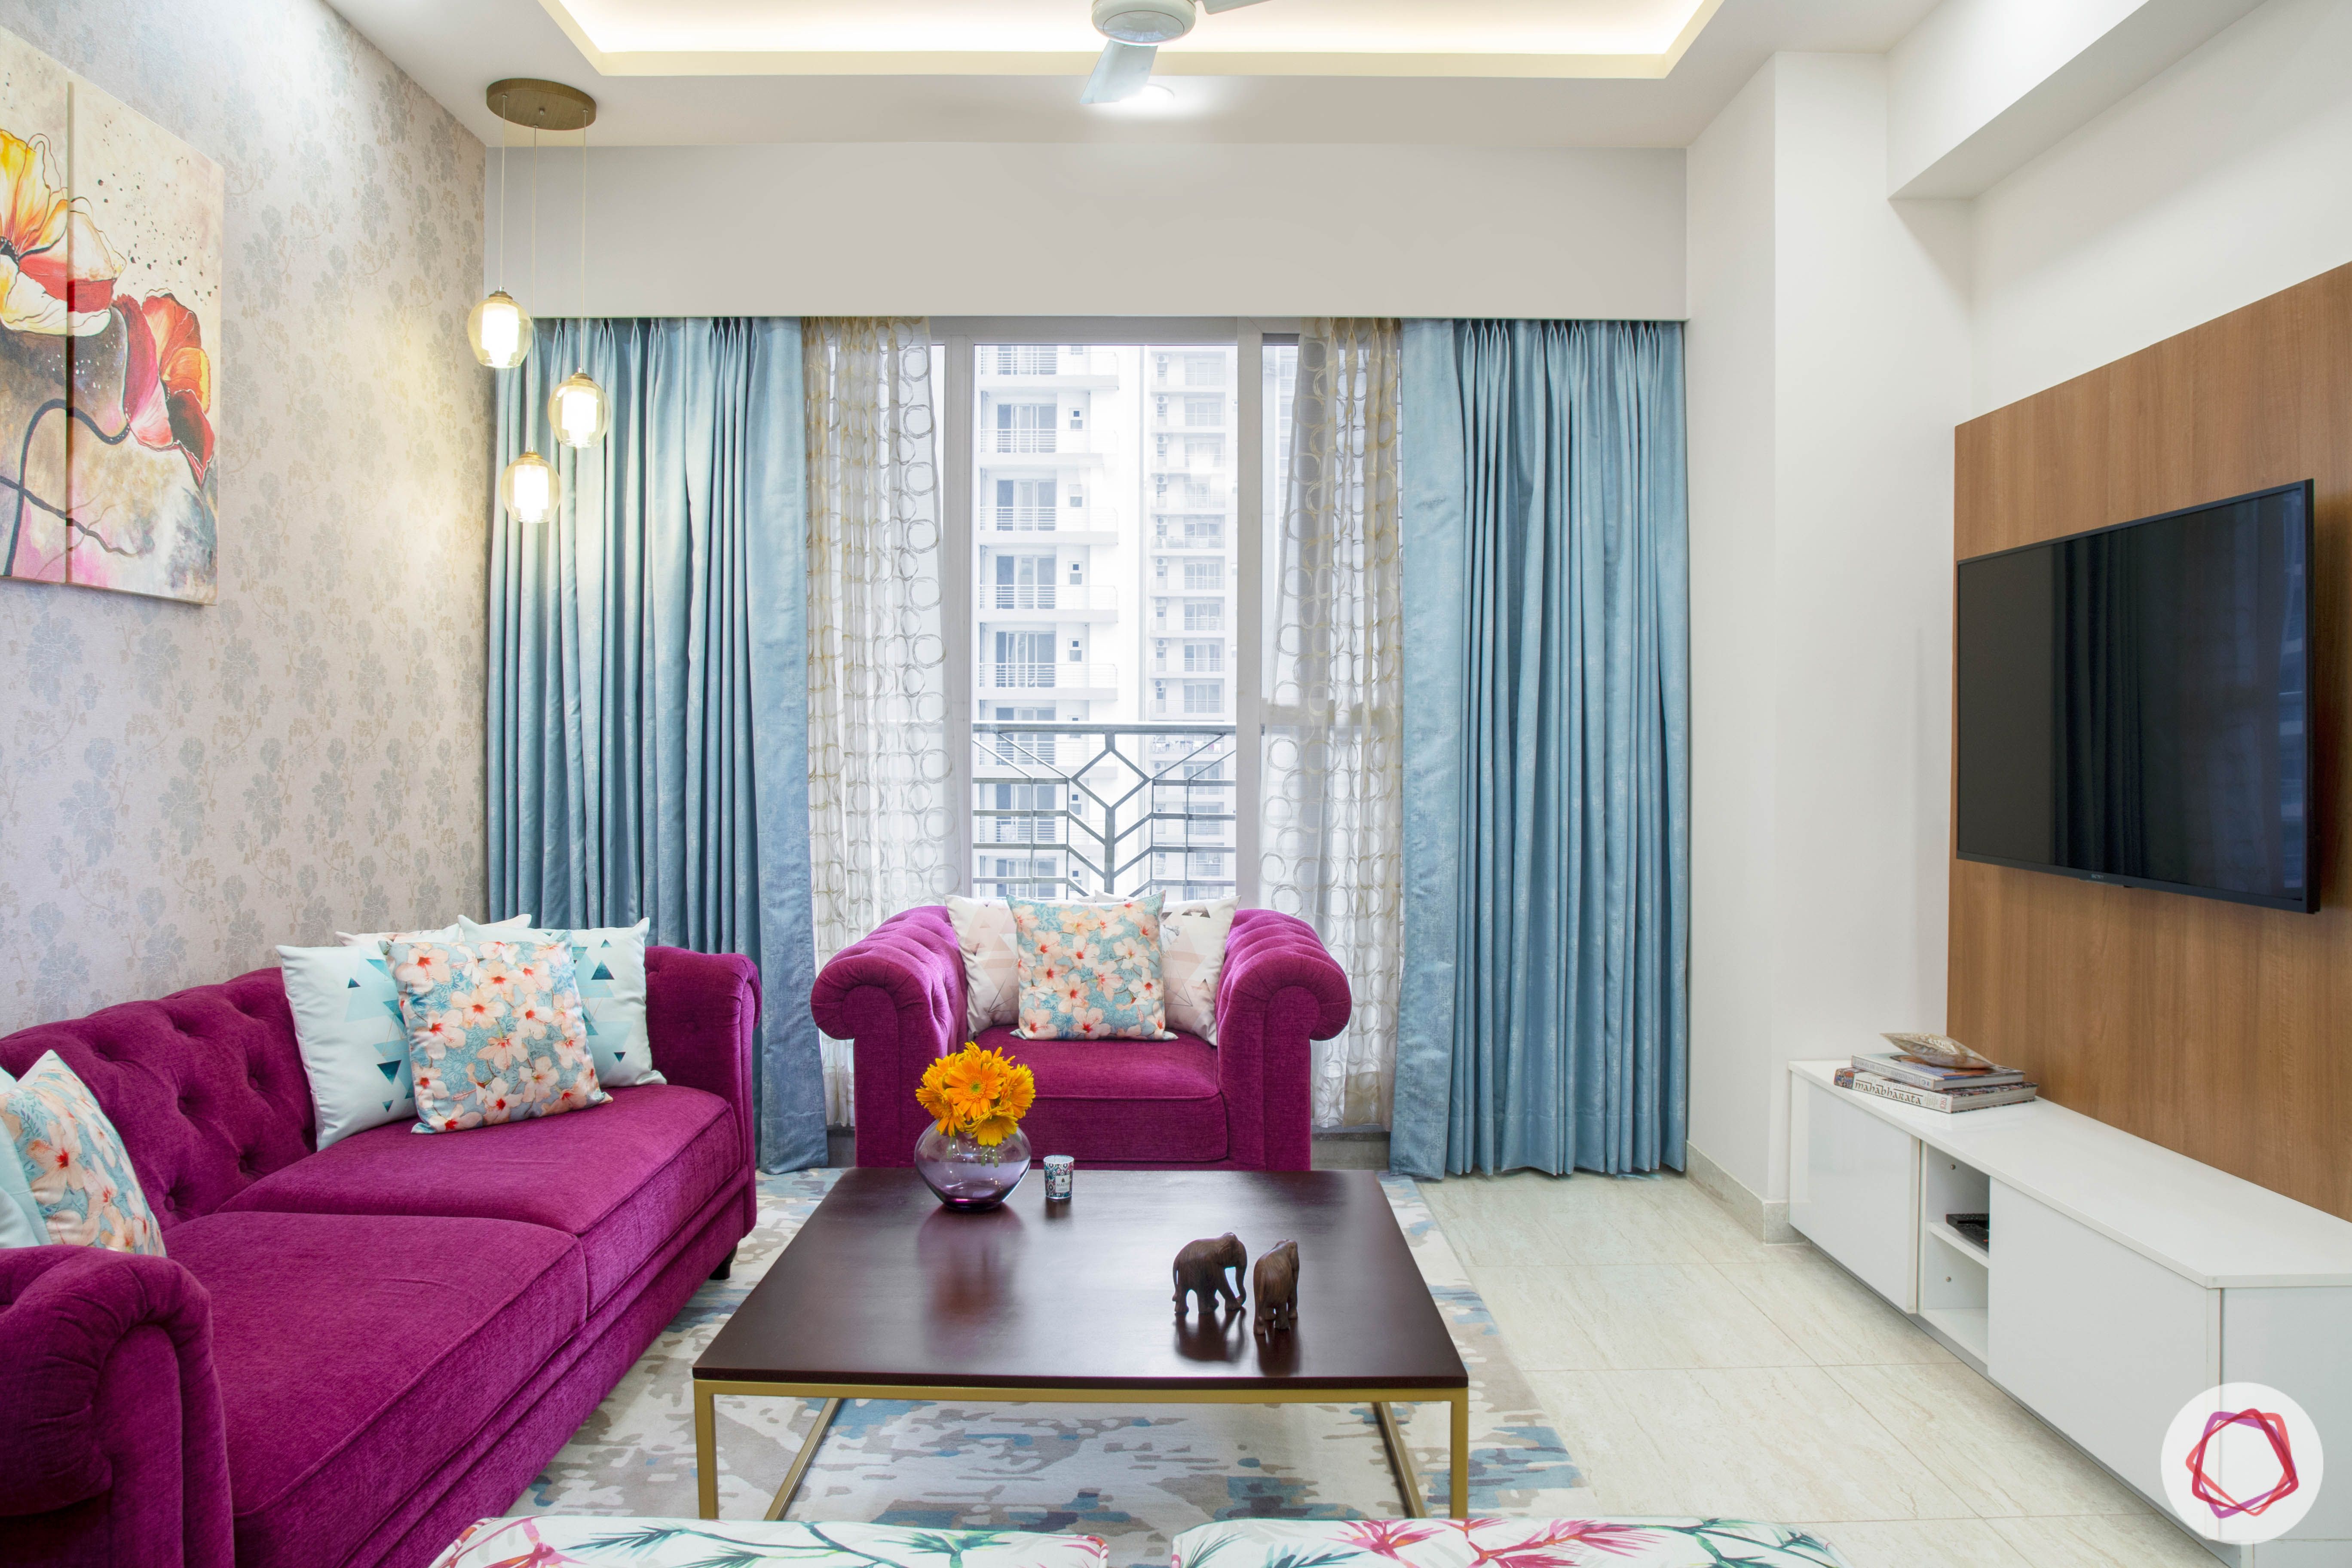 Cleo county noida_living room with sheer drapes and ample lighting